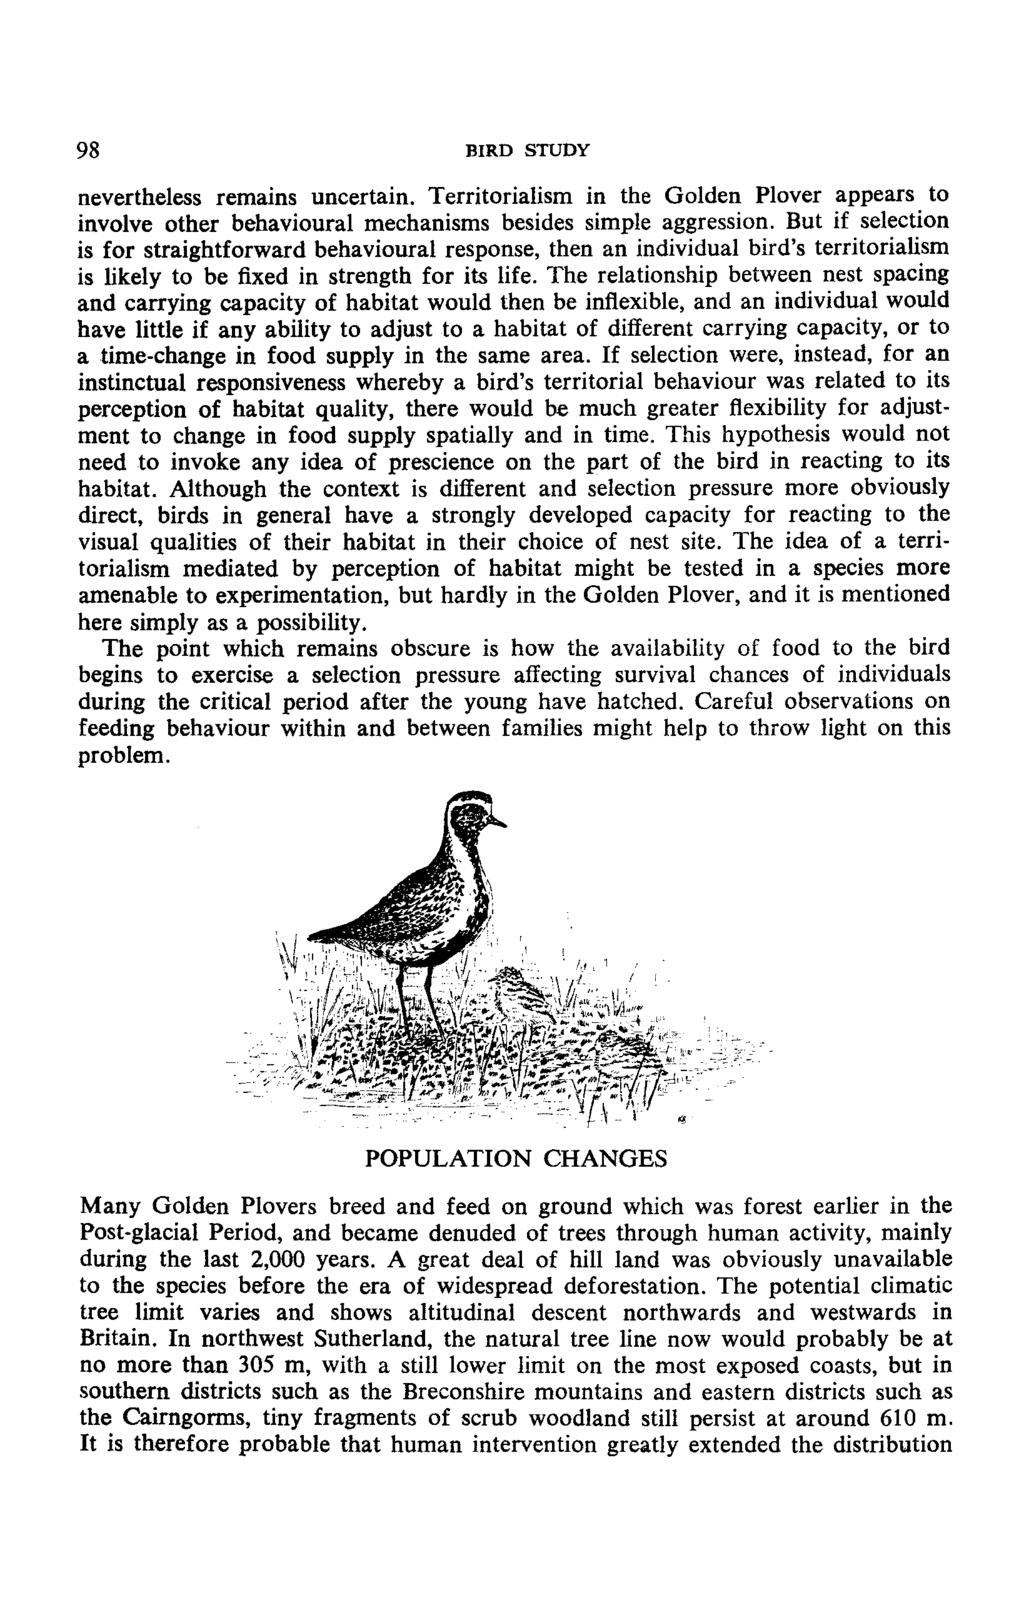 98 BIRD STUDY nevertheless remains uncertain. Territorialism in the Golden Plover appears to involve other behavioural mechanisms besides simple aggression.